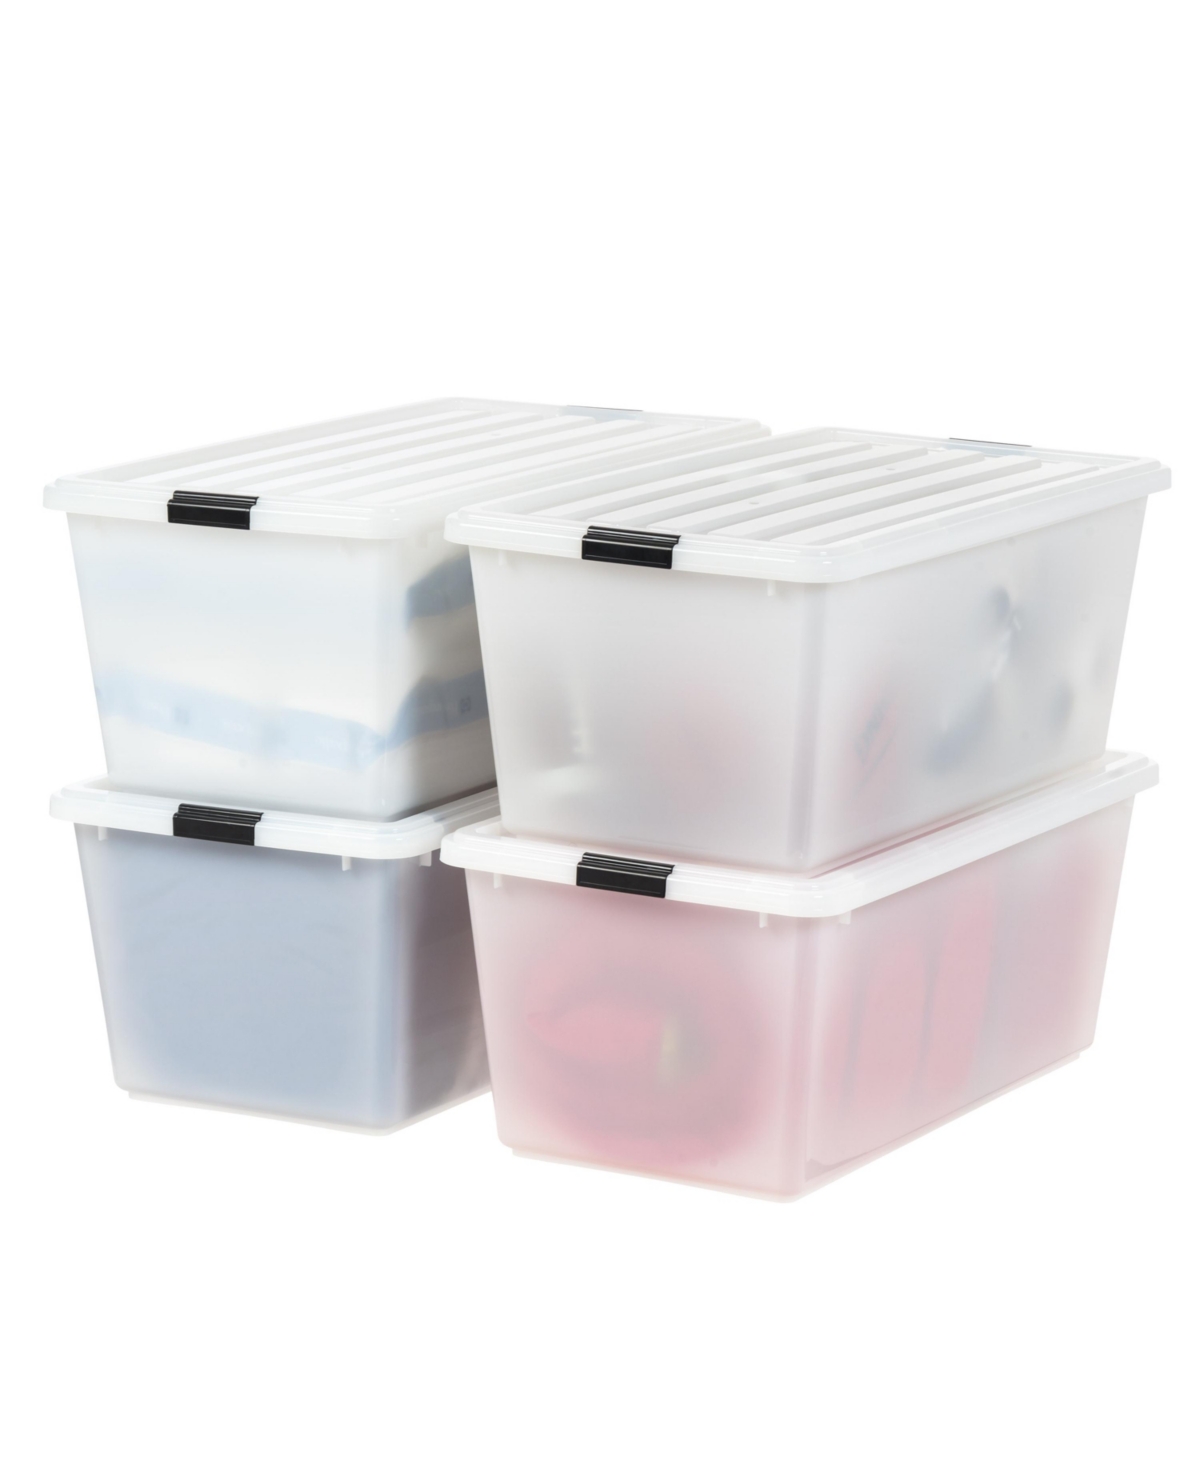 91 Quart Stackable Plastic Storage Bins with Lids and Latching Buckles, 4 Pack, Containers with Lids, Durable Nestable Closet, Garage, Totes,